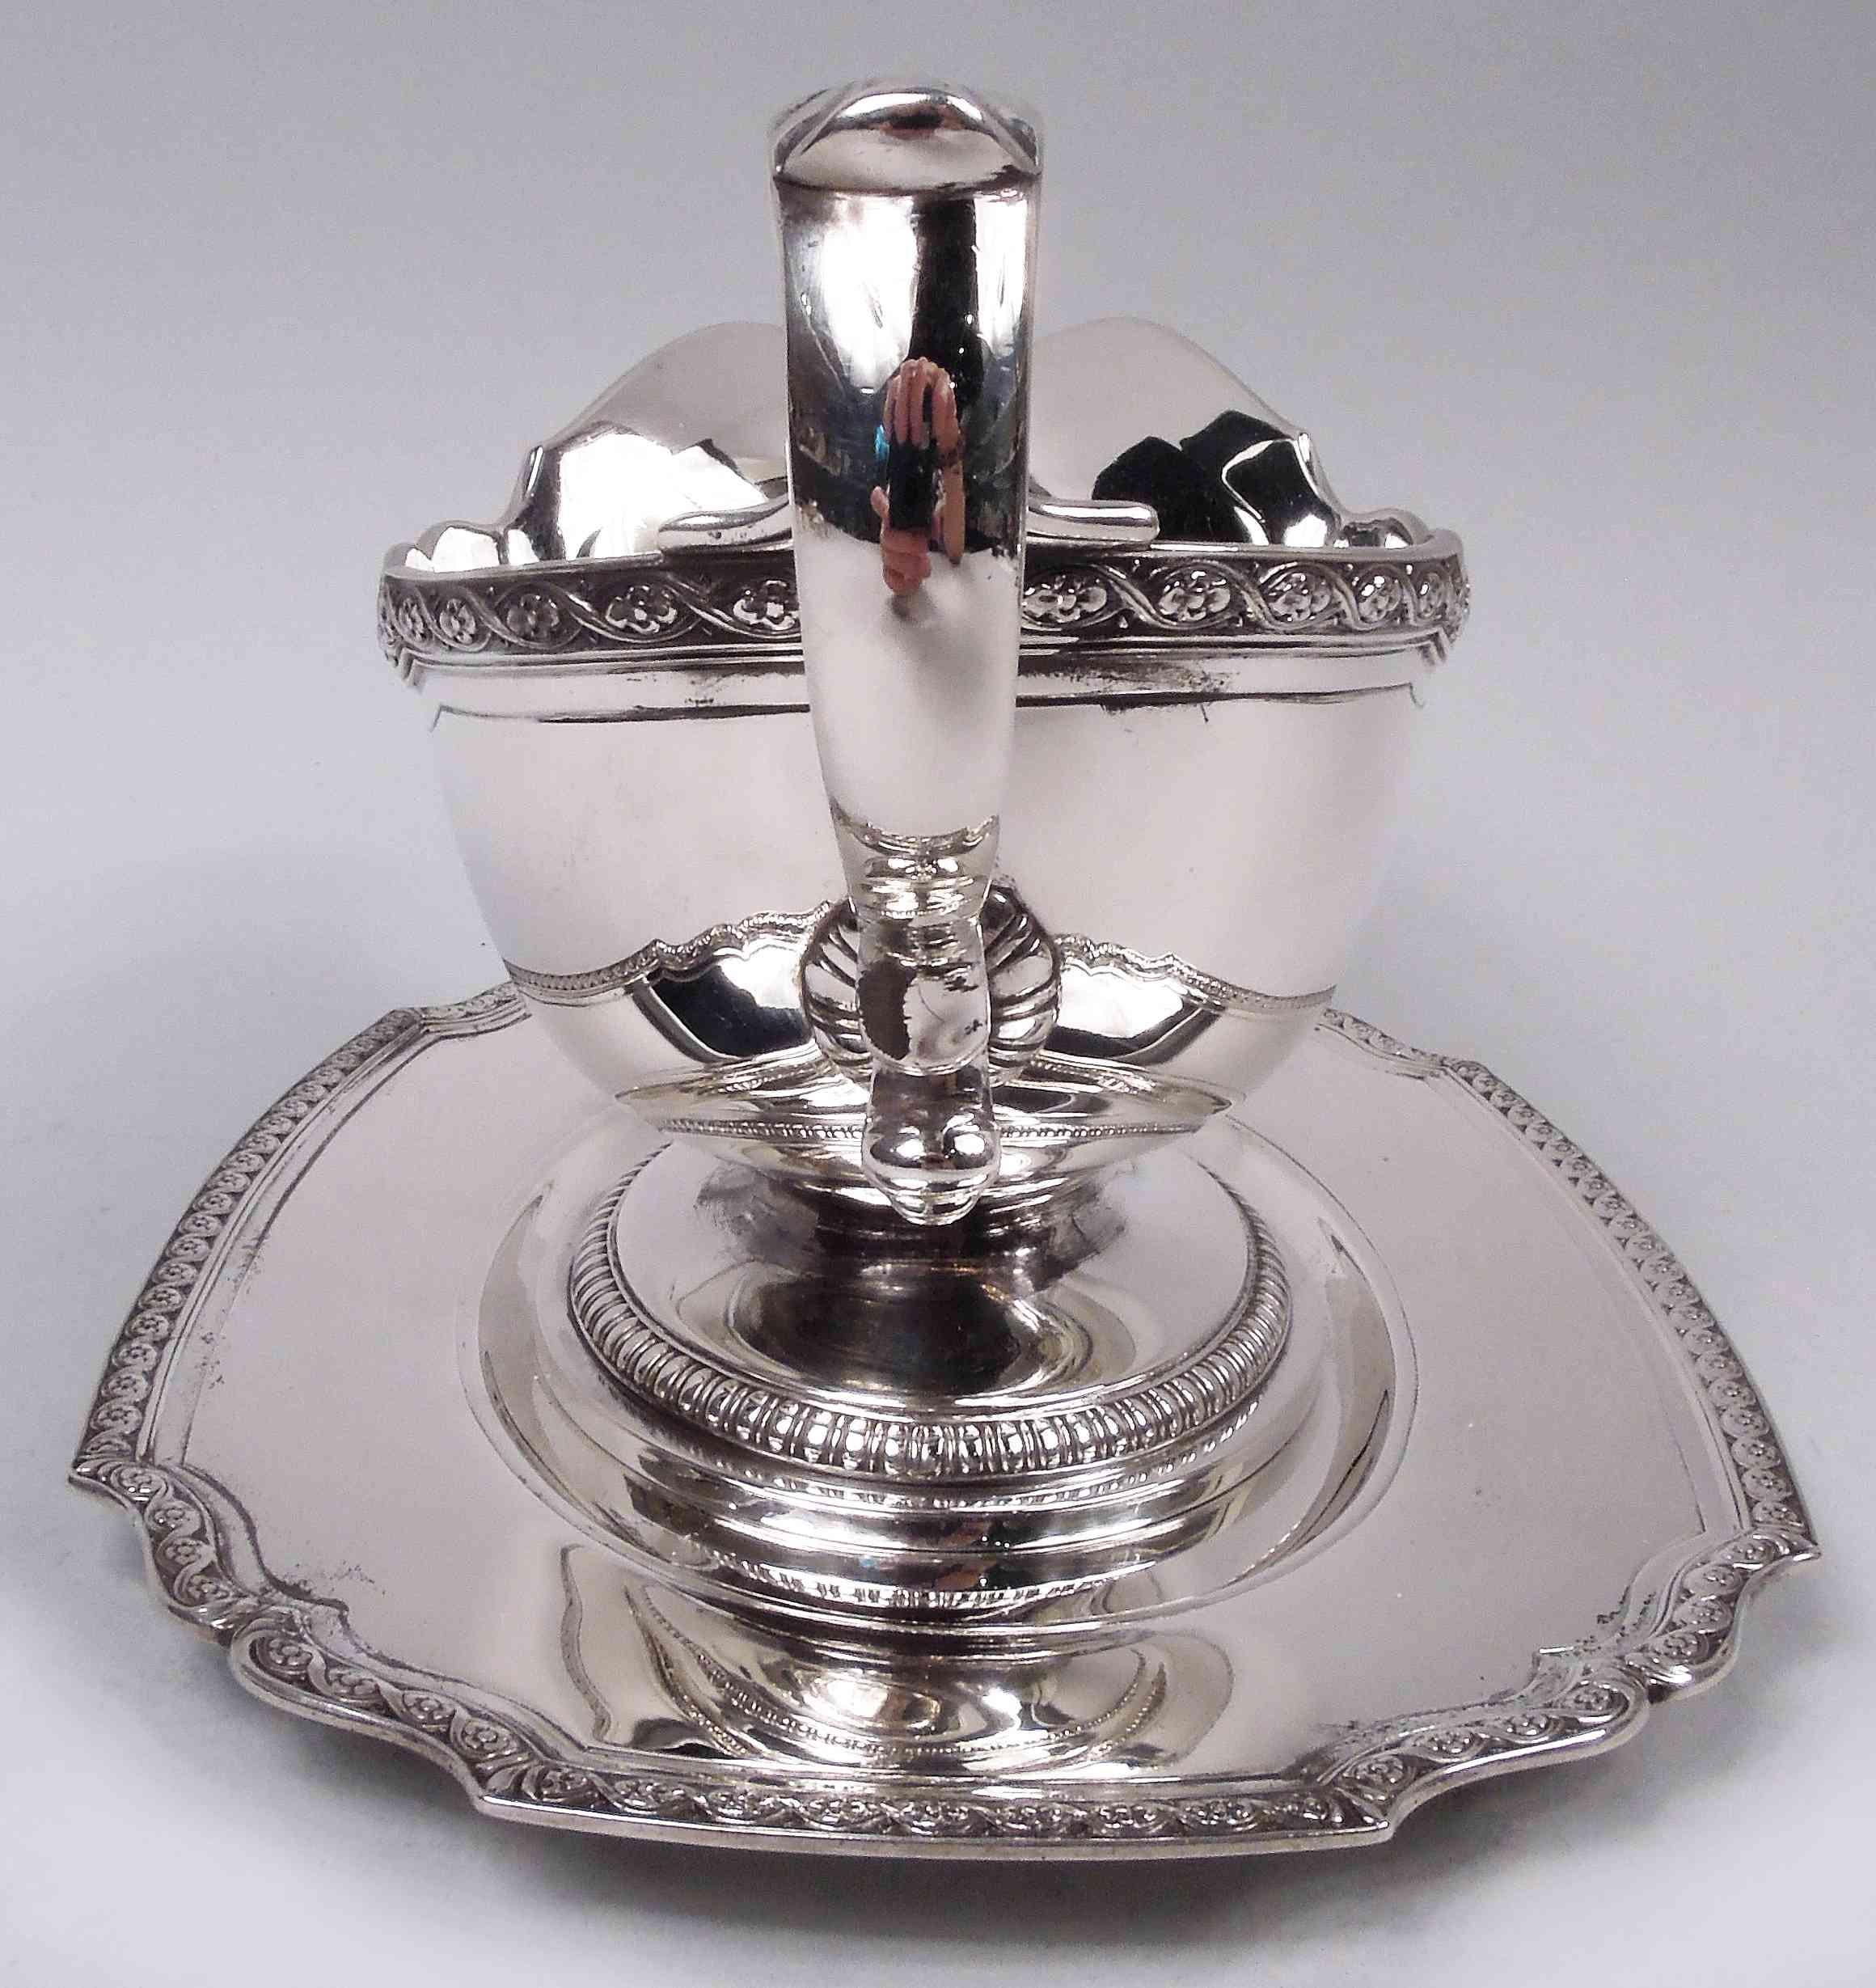 Tiffany Edwardian Classical Sterling Silver Gravy Boat on Stand For Sale 2